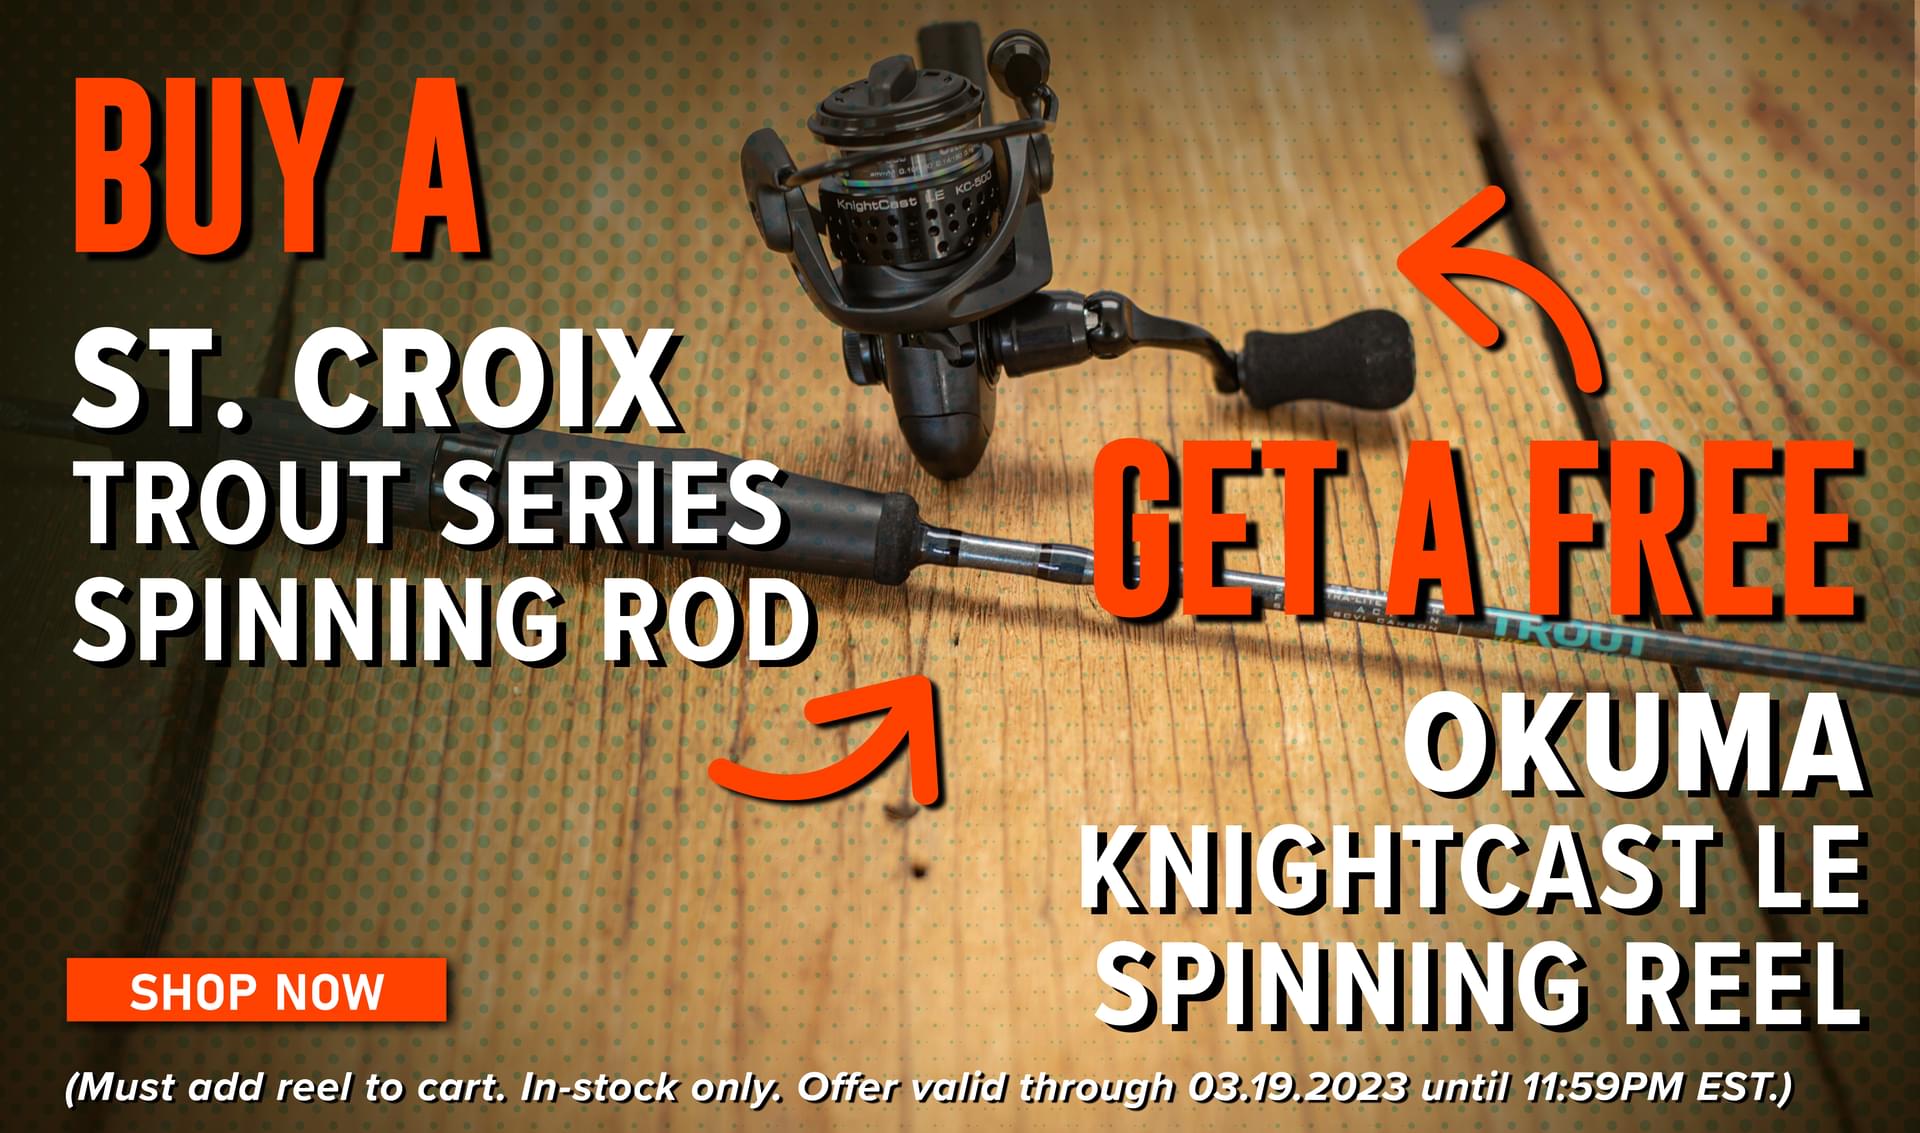 Buy A St. Croix Trout Series Spinning Rod Get a Free Okuma Knightcas LE SPinningReel Shop Now (Must add reel to cart. In-stock only. Offer valid through 03.19 2023 until 11:59PM EST.)